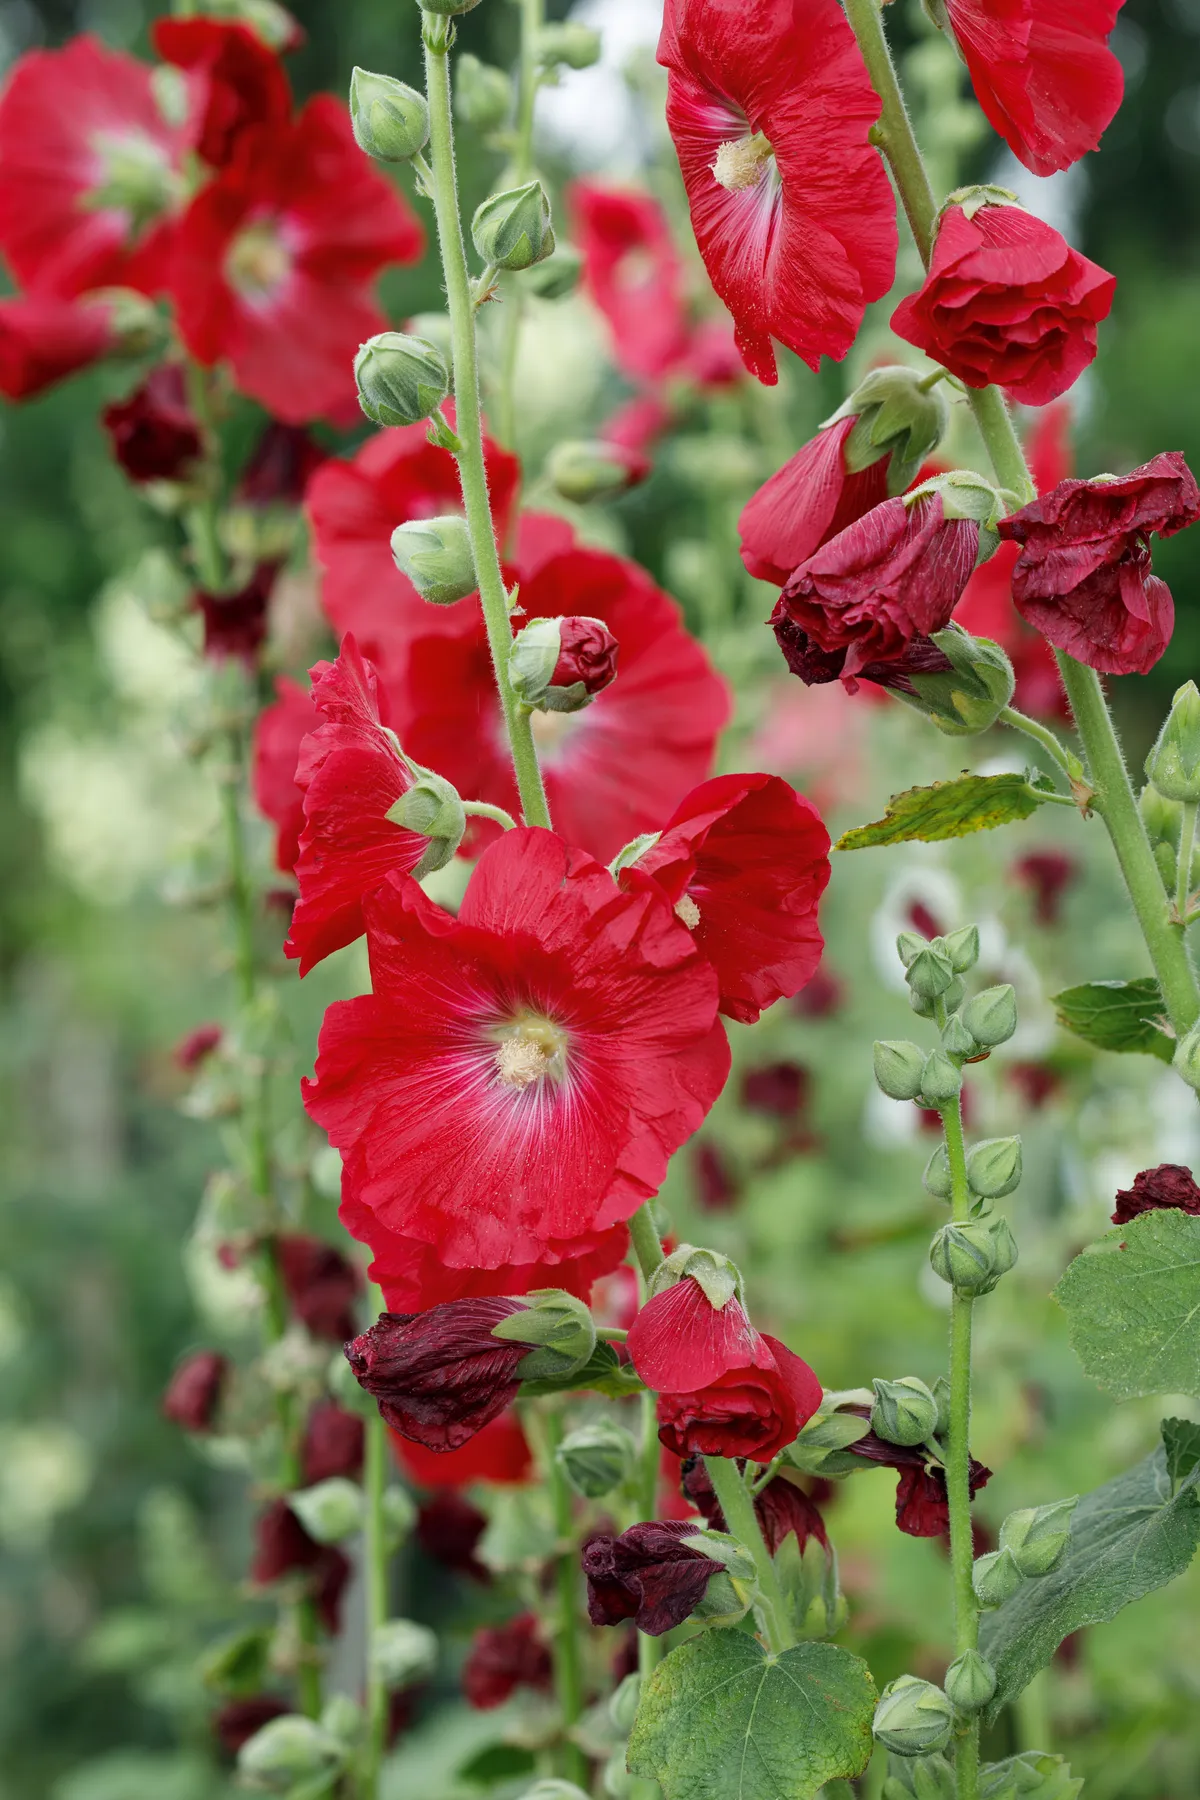 Hollyhock Flower, Alcea rosea - Plant Care and Grow from Seeds